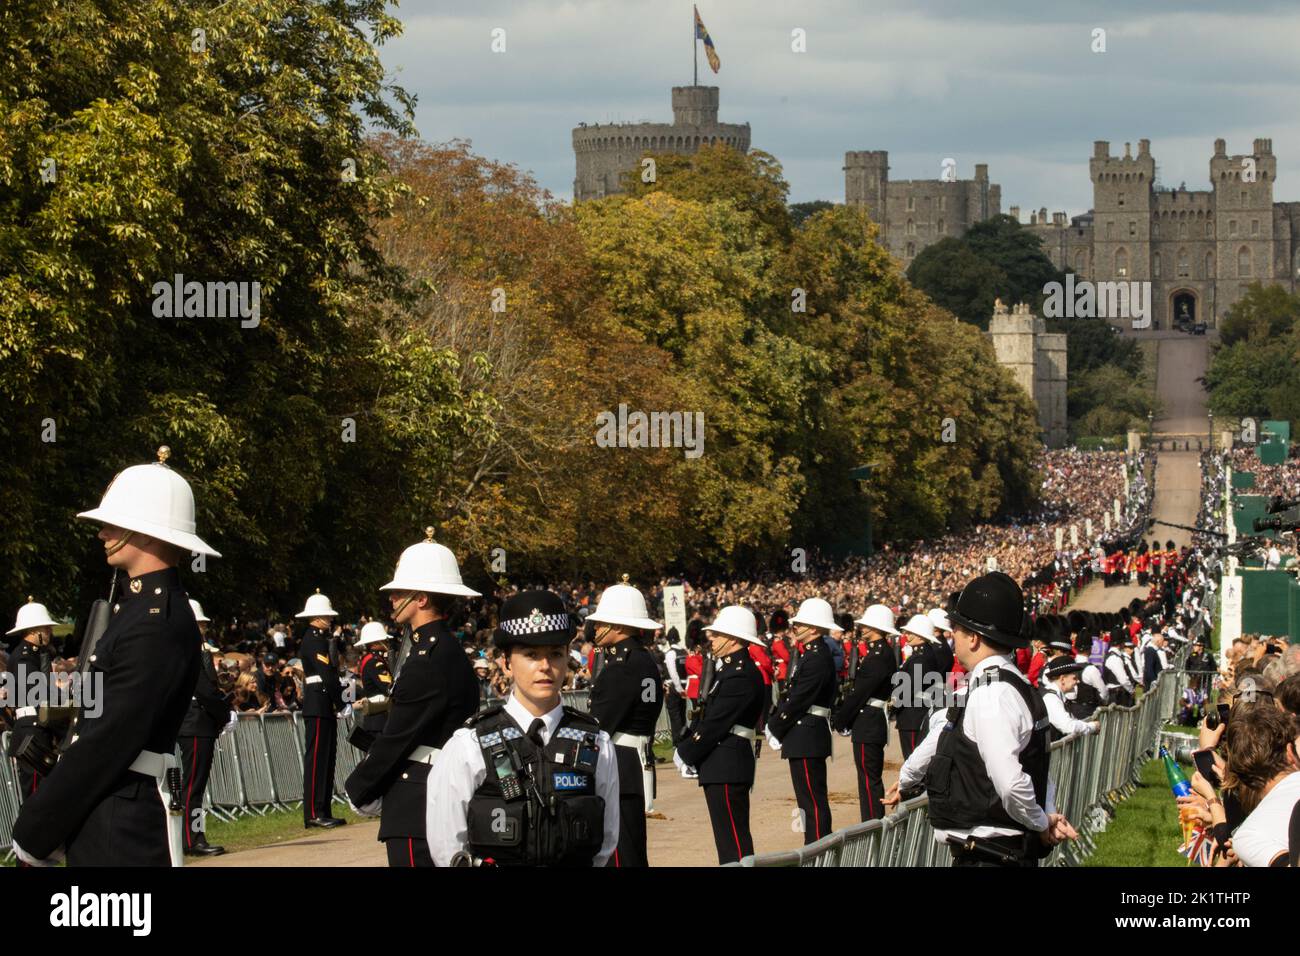 Windsor, UK. 19th September, 2022. Royal Marines and other military personnel flank a section of the Long Walk in Windsor Great Park prior to the procession of Queen Elizabeth II's coffin in the State Hearse to St George’s Chapel for the Committal Service. Queen Elizabeth II, the UK's longest-serving monarch, died at Balmoral aged 96 on 8th September 2022 after a reign lasting 70 years. Credit: Mark Kerrison/Alamy Live News Stock Photo